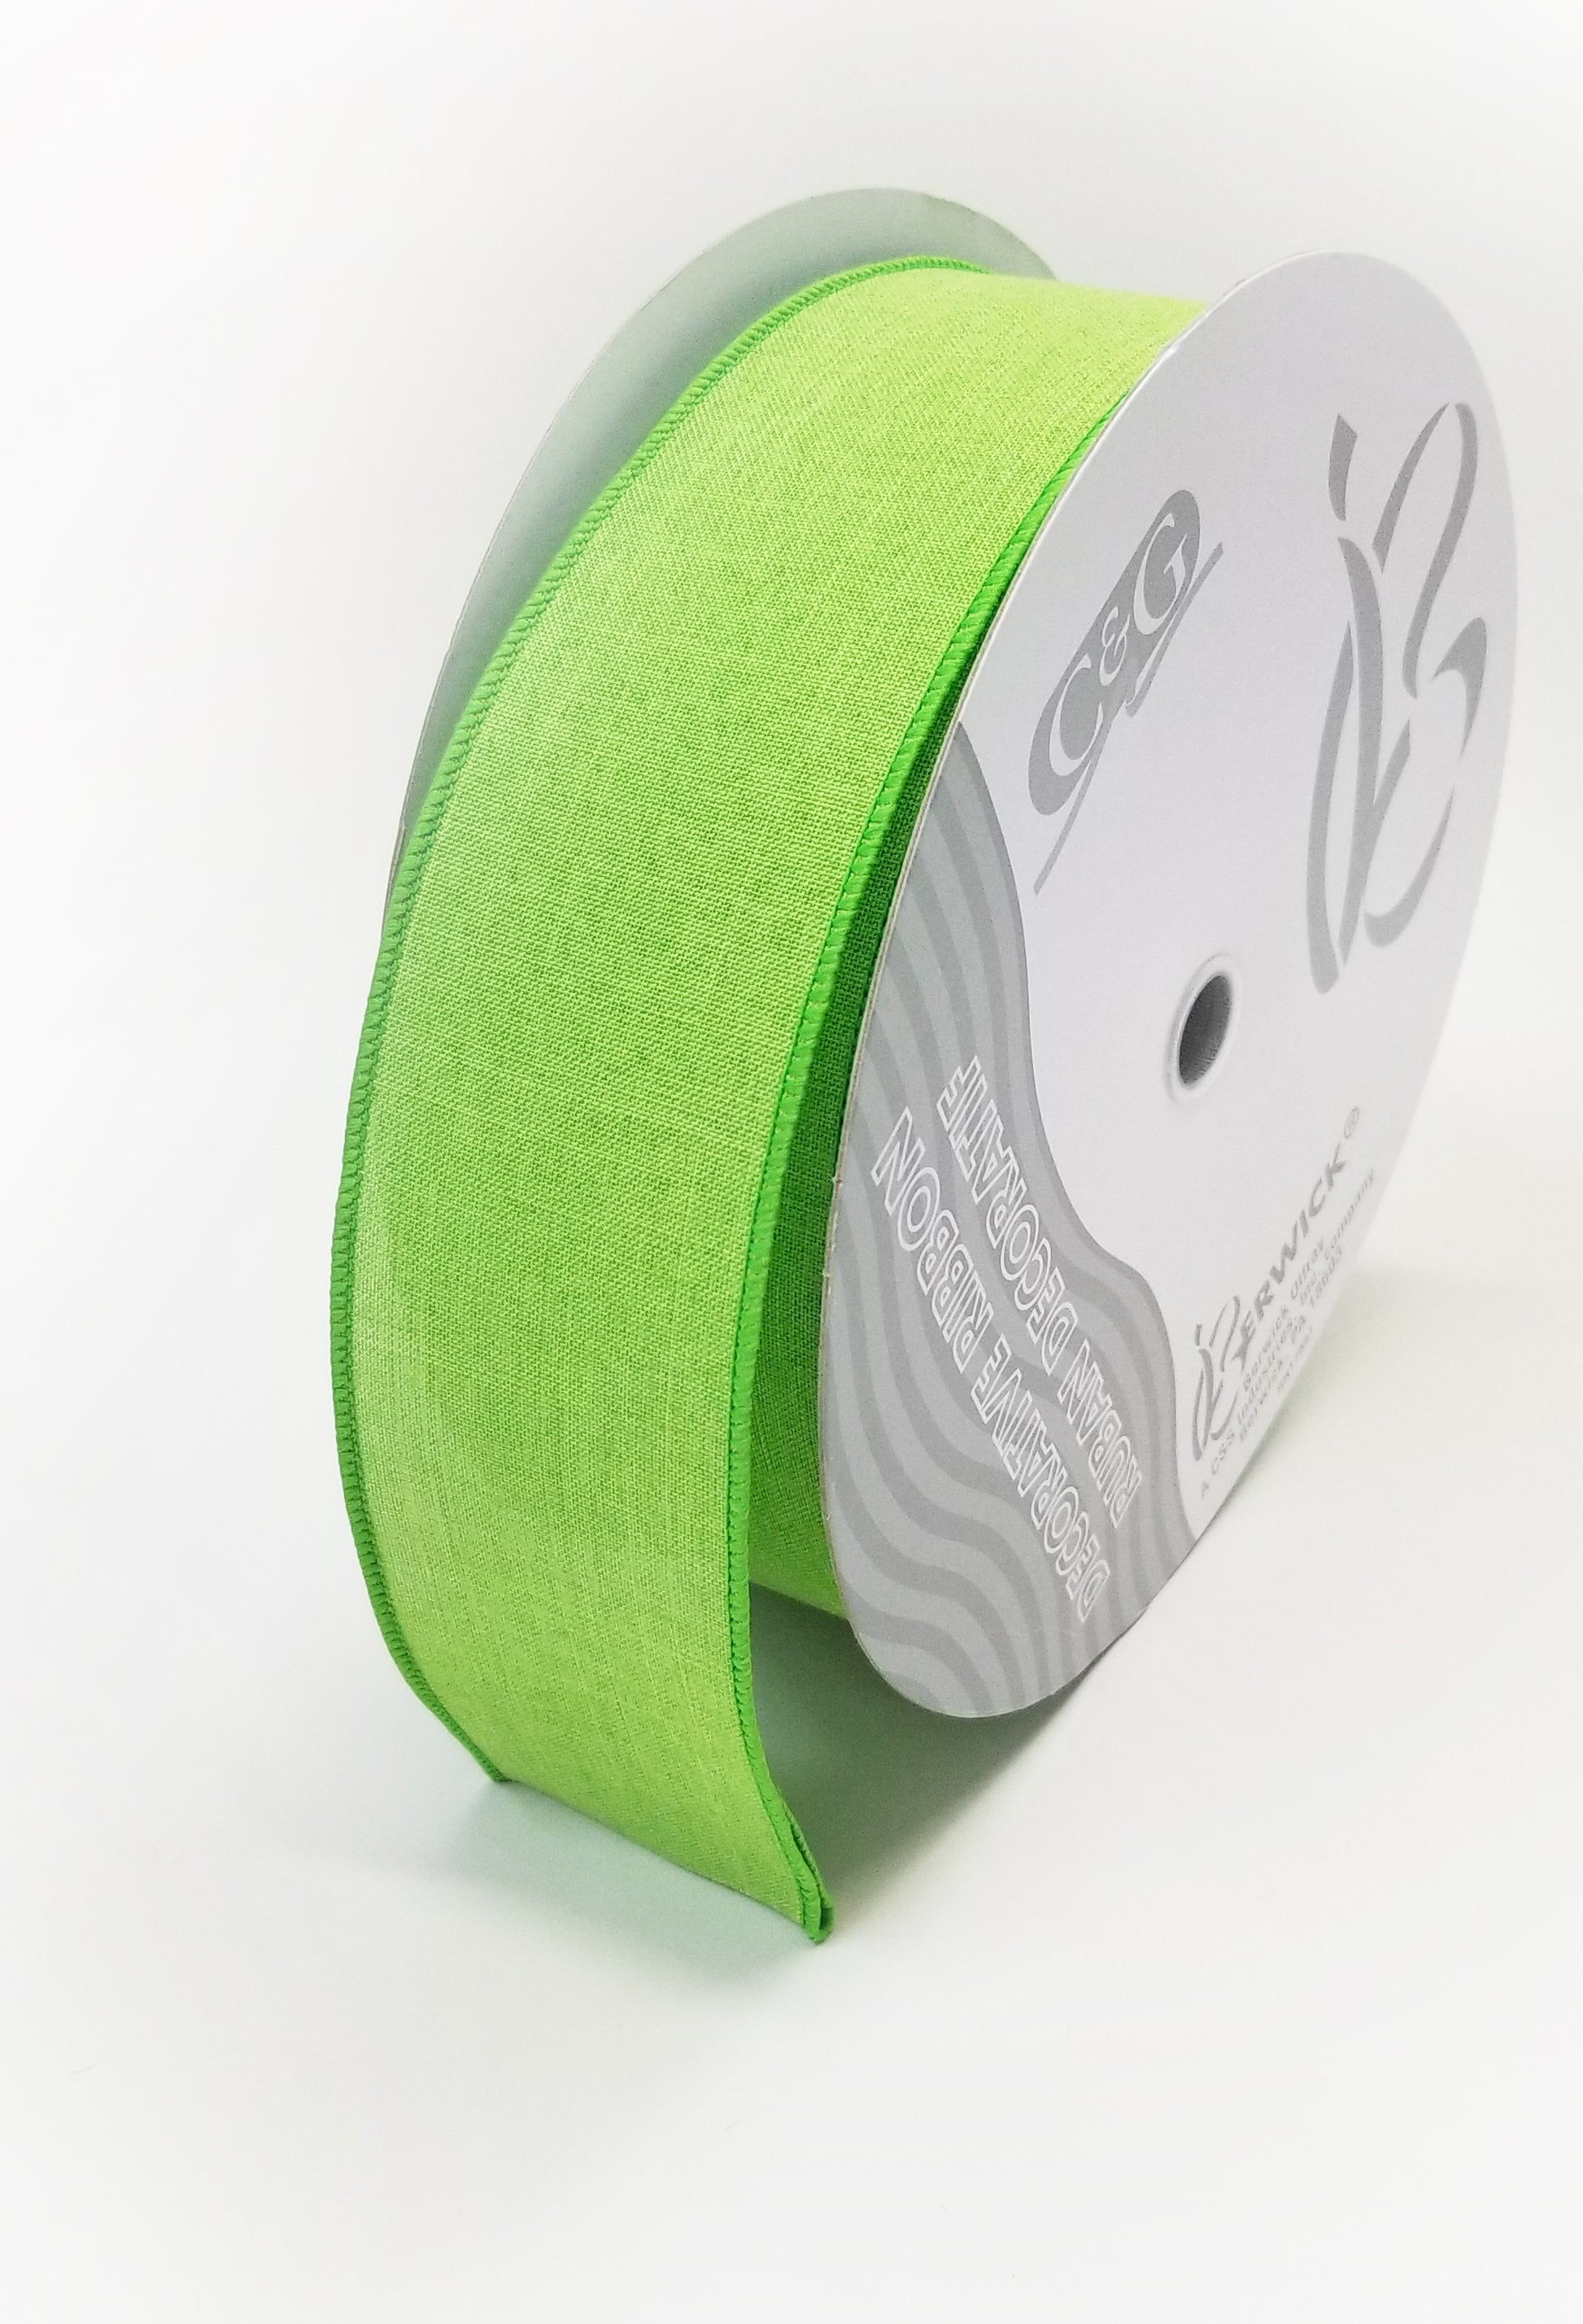 Shop Lime Green 1 1/2 inch x 10 yards Ribbon at JAM Paper Store